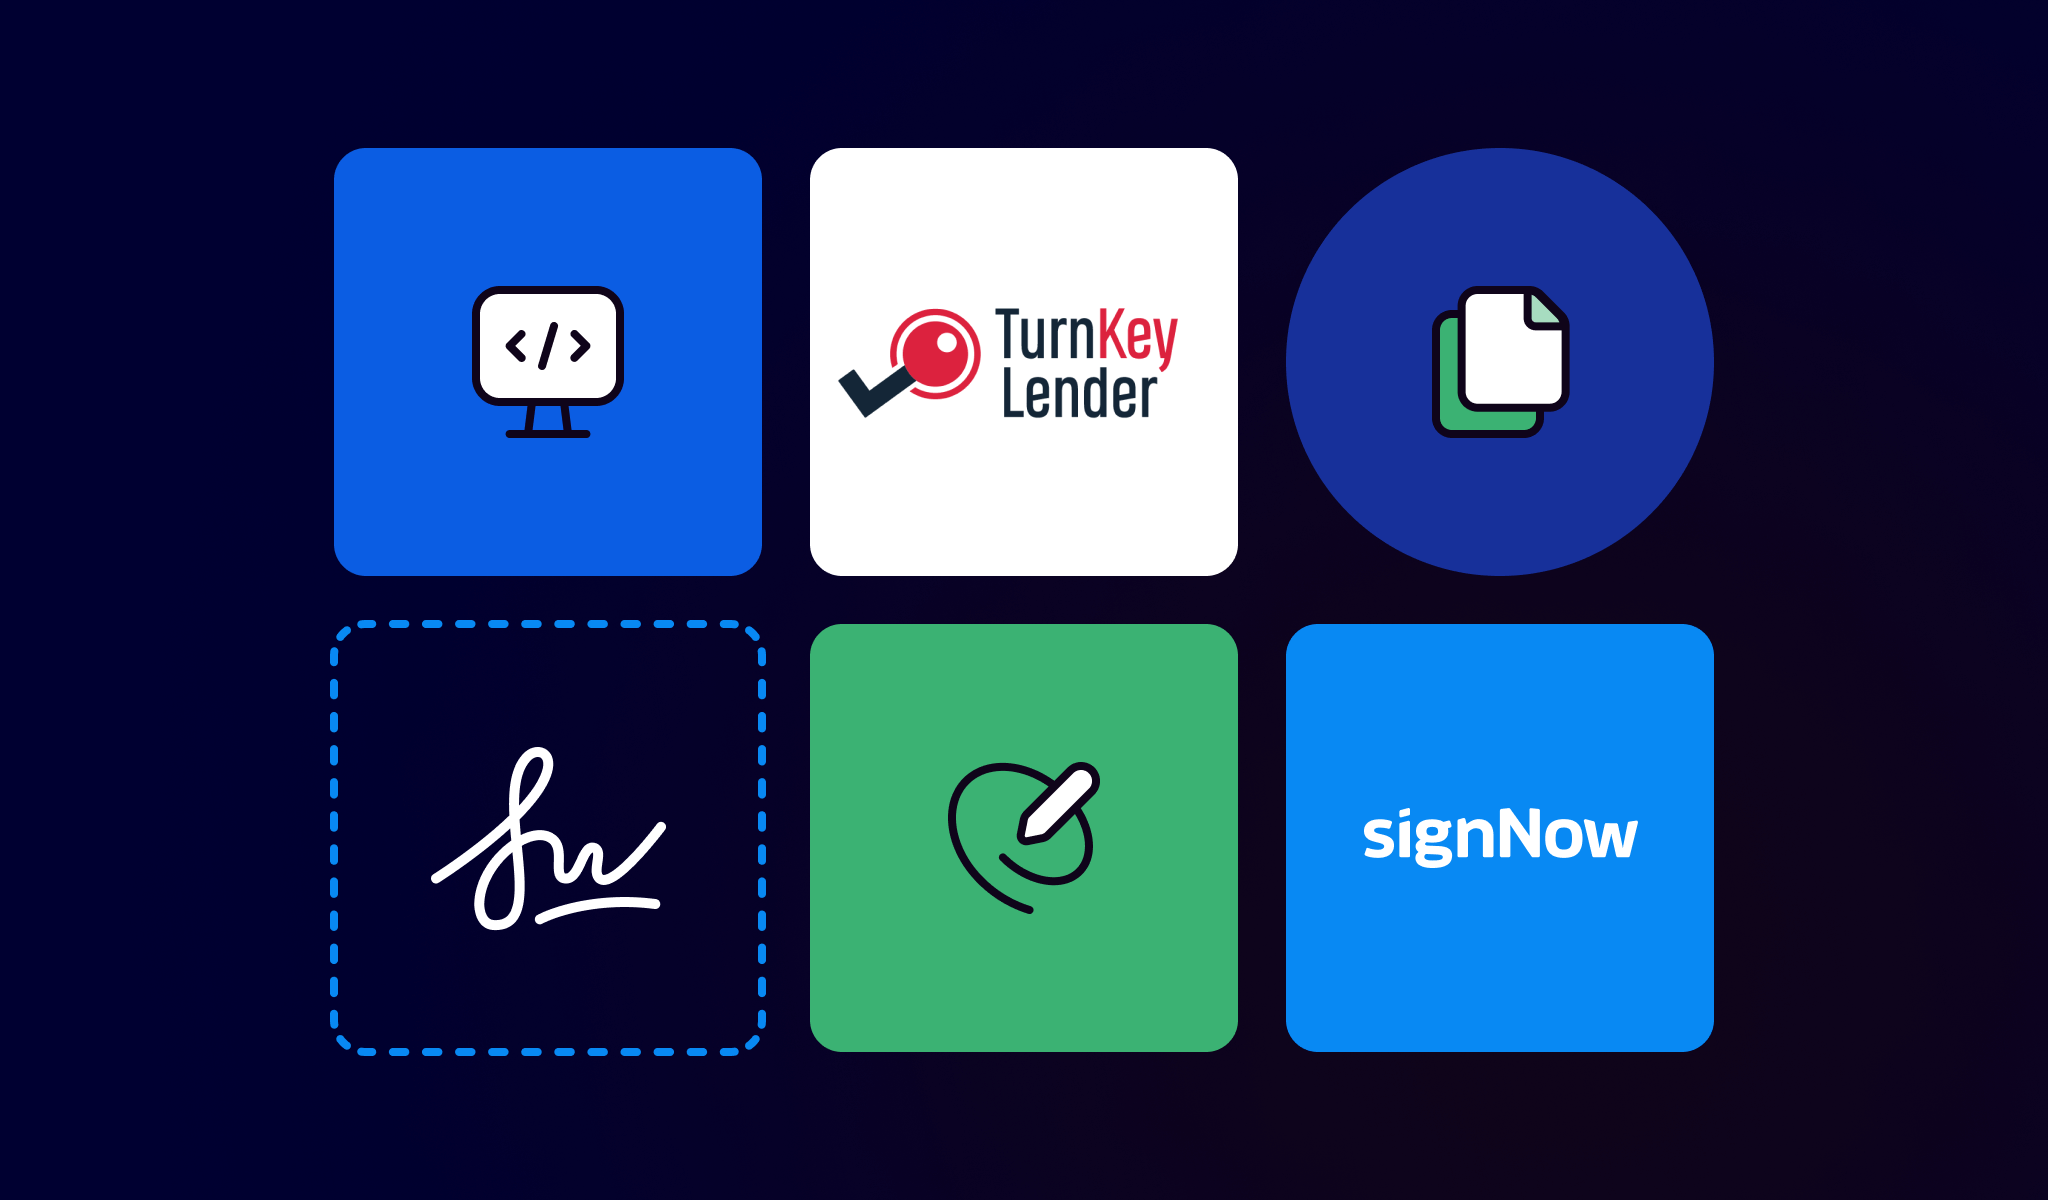 signnow api turnkey lender customer story featured